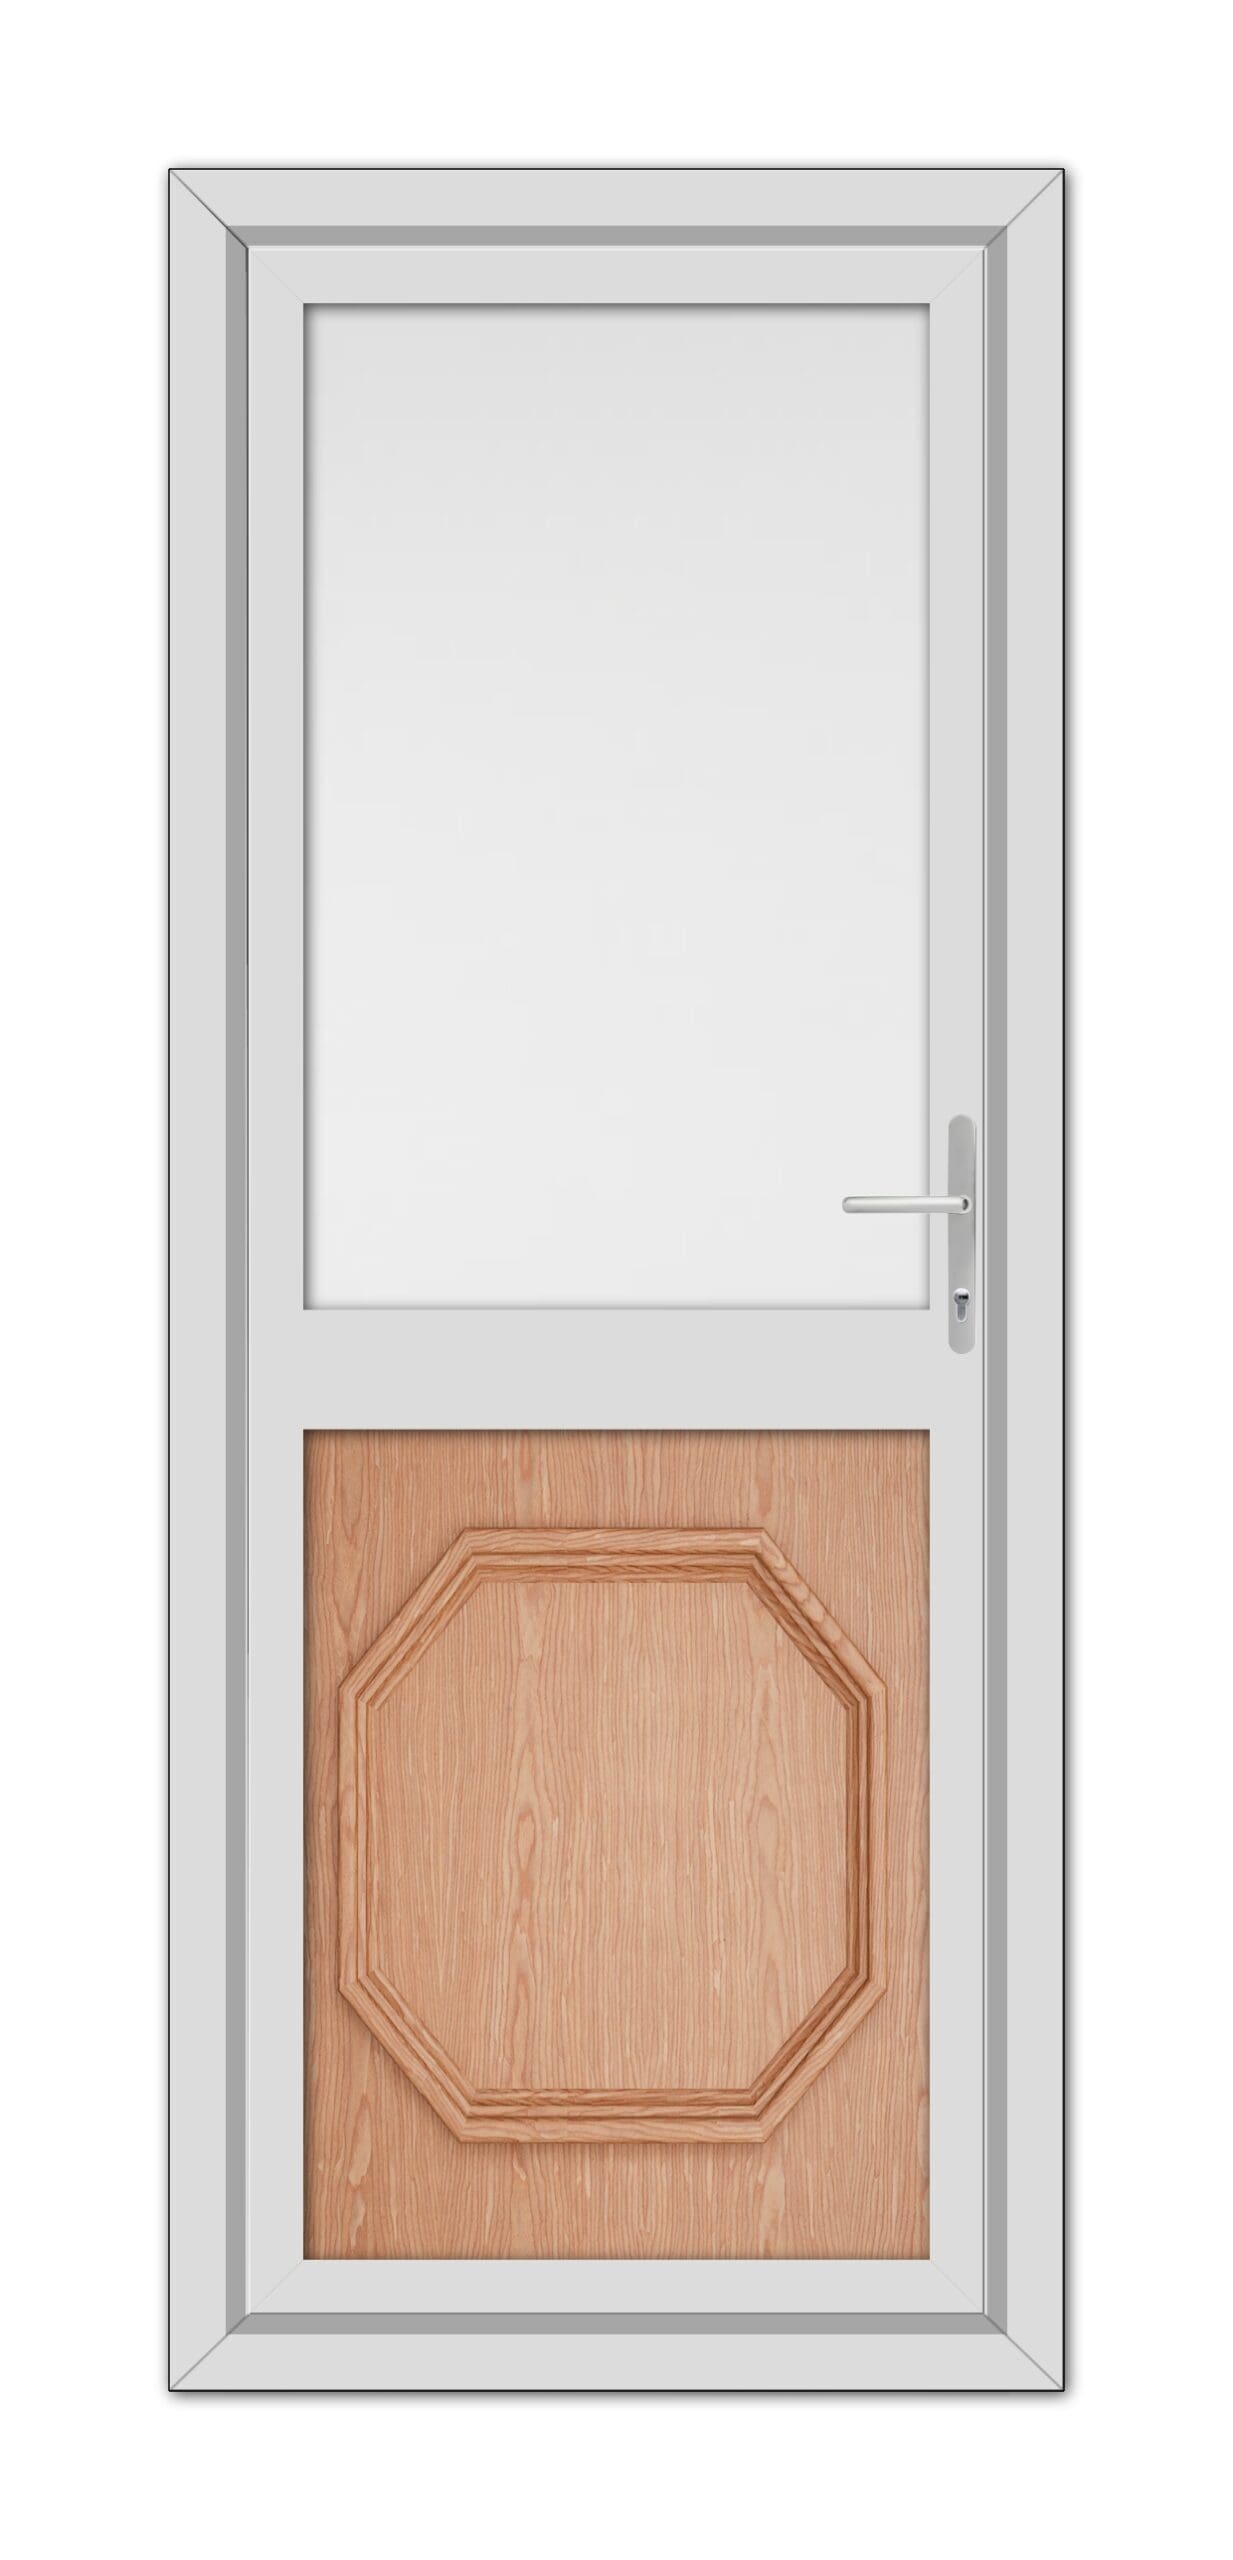 A modern Irish Oak Buckingham Half uPVC Back Door featuring a silver frame, lower wooden panel, and upper glass window, fitted with a metallic handle.